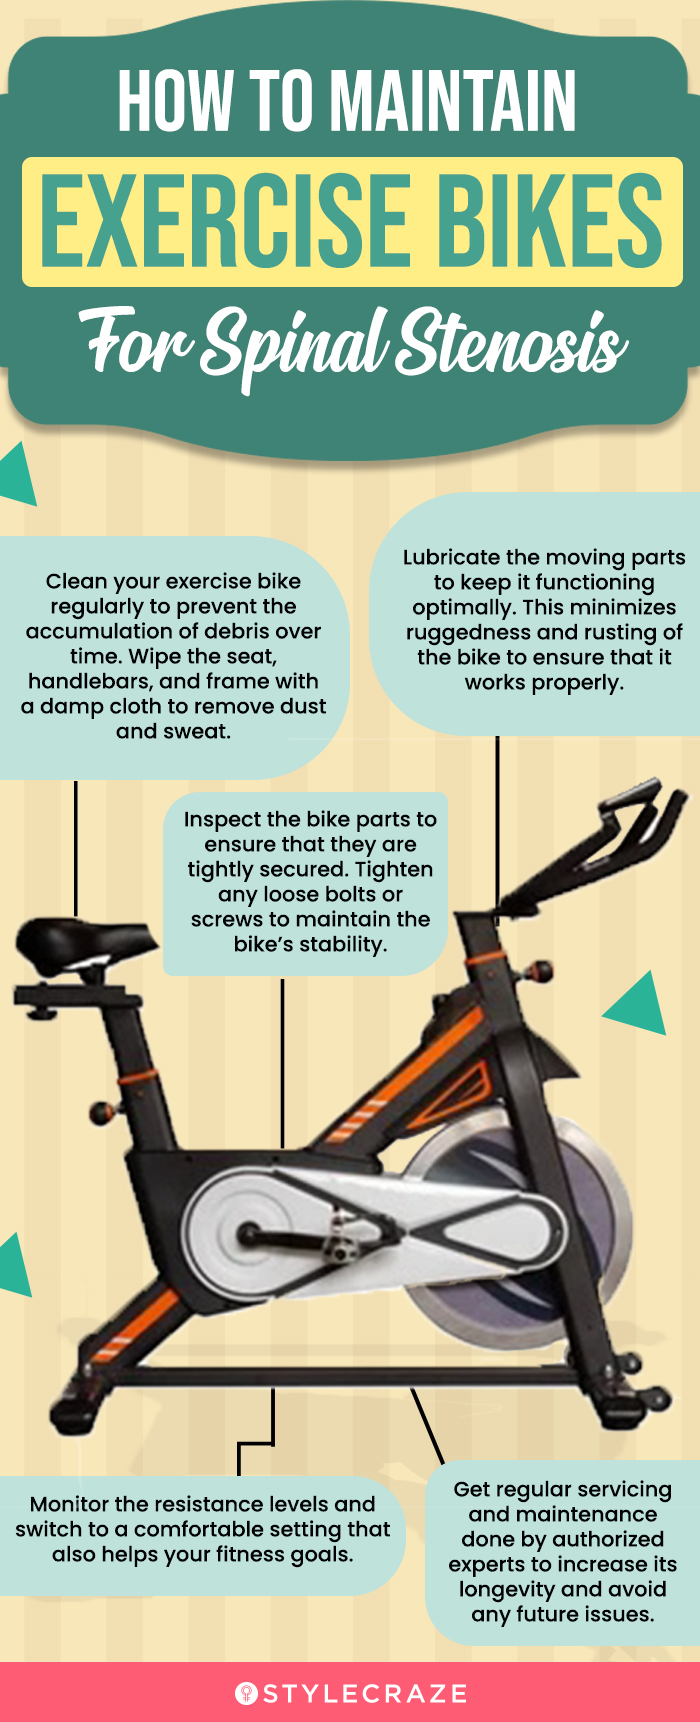 How To Maintain Exercise Bikes For Spinal Stenosis (infographic)